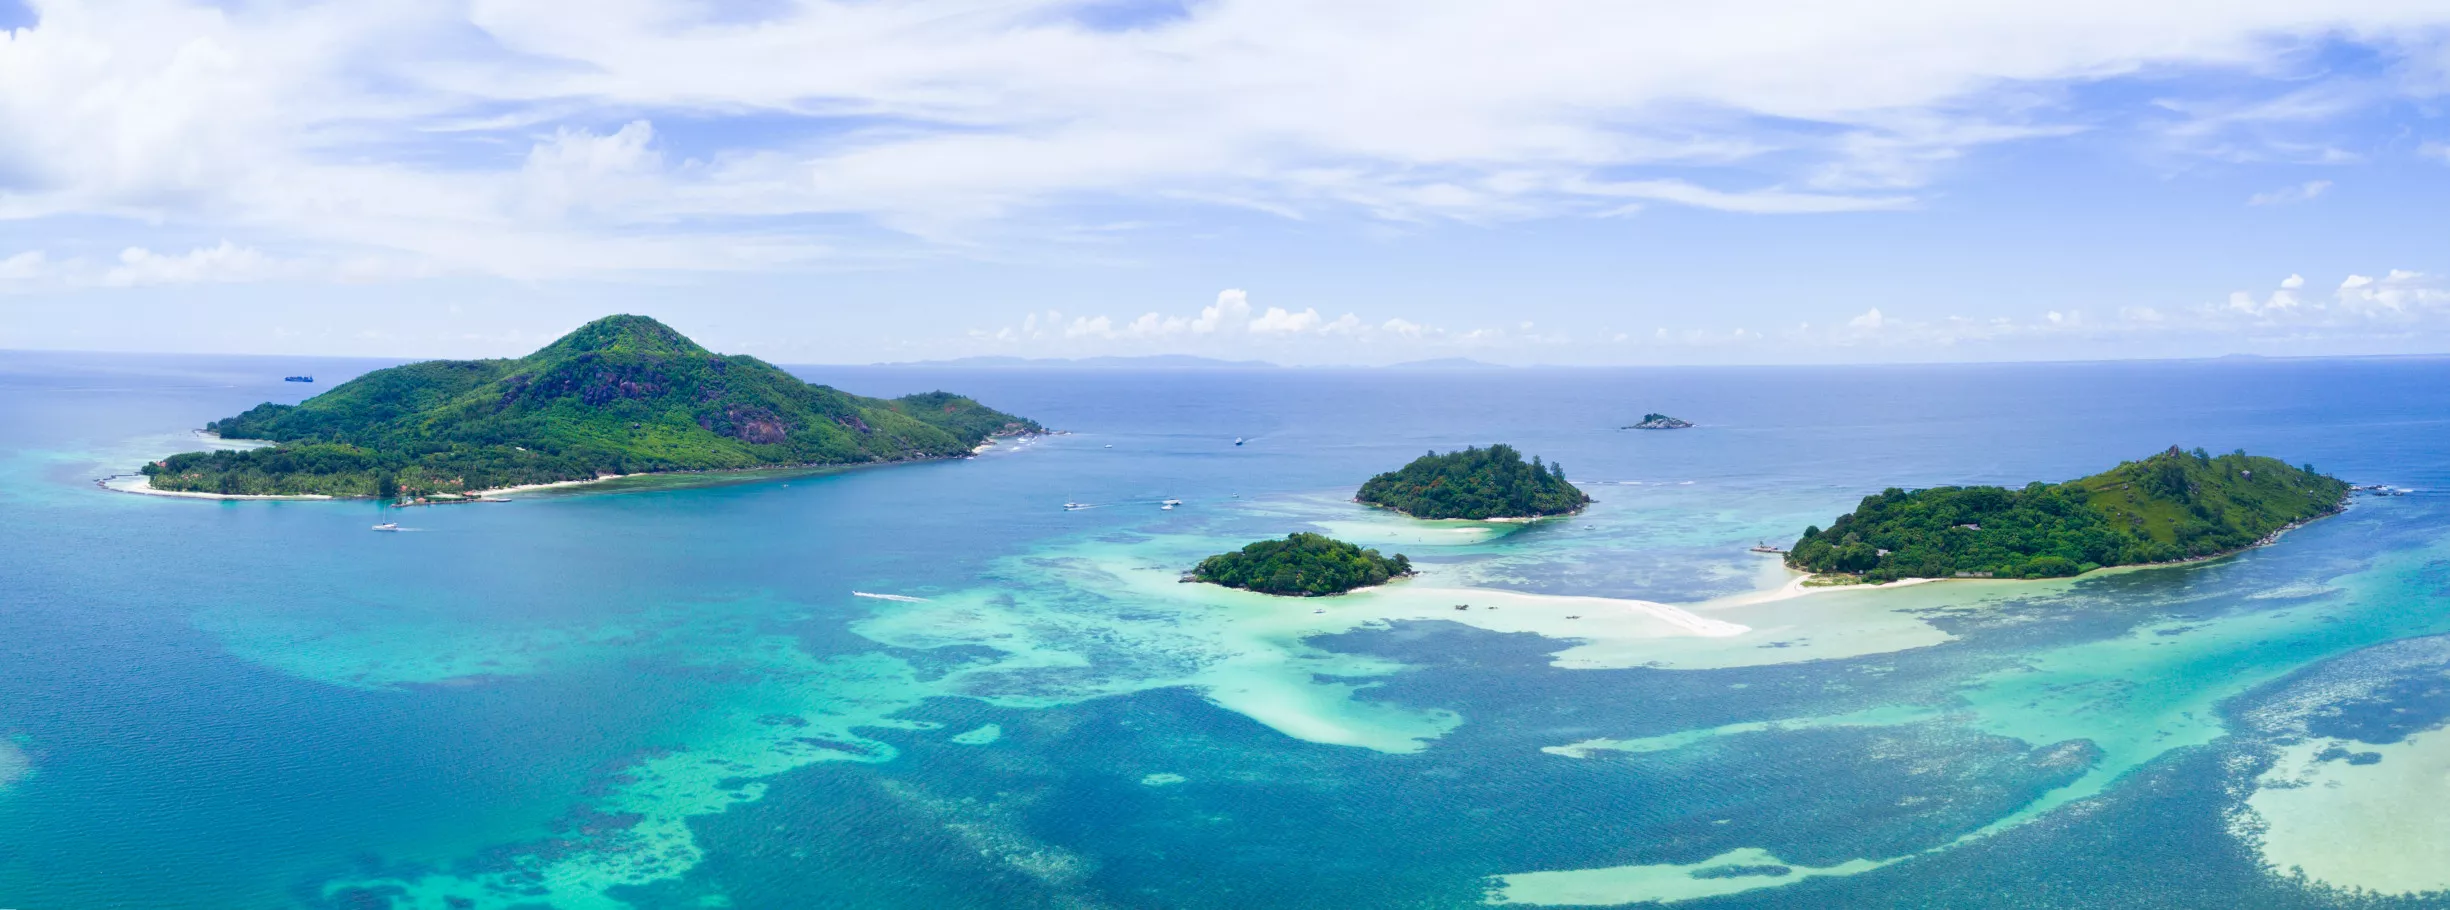 Ste Anne Marine National Park in Republic of Seychelles, Africa | Parks - Rated 3.7